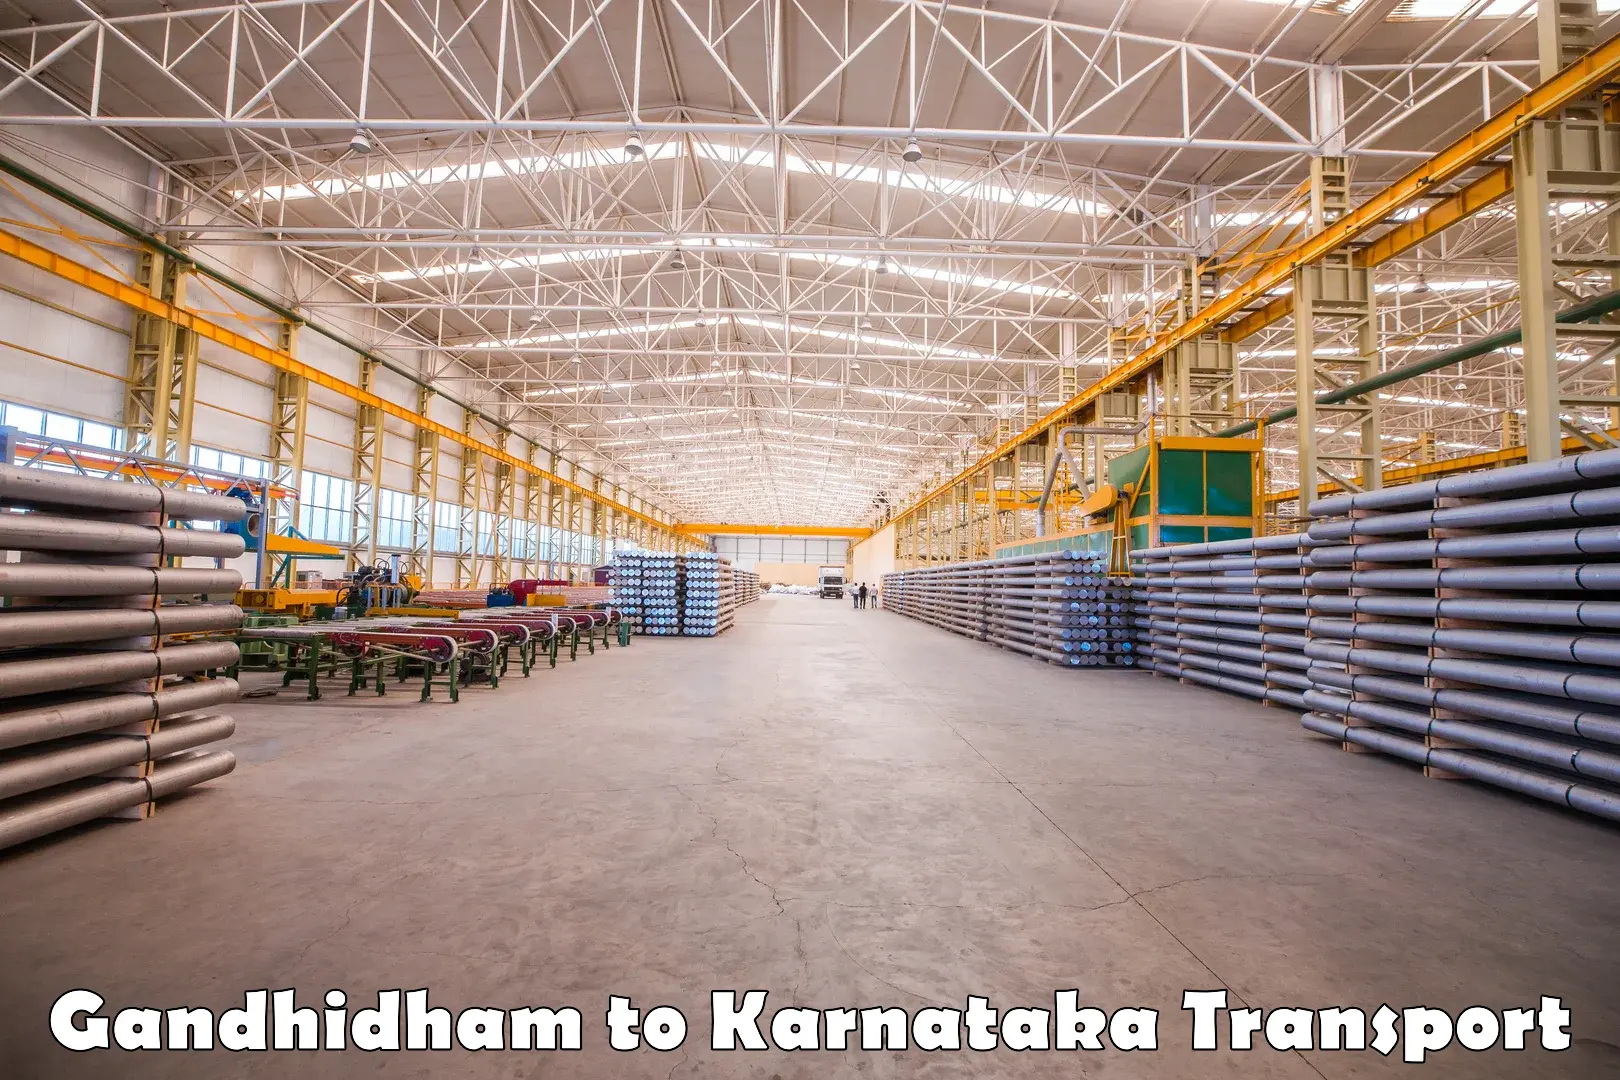 Delivery service Gandhidham to Mangalore Port